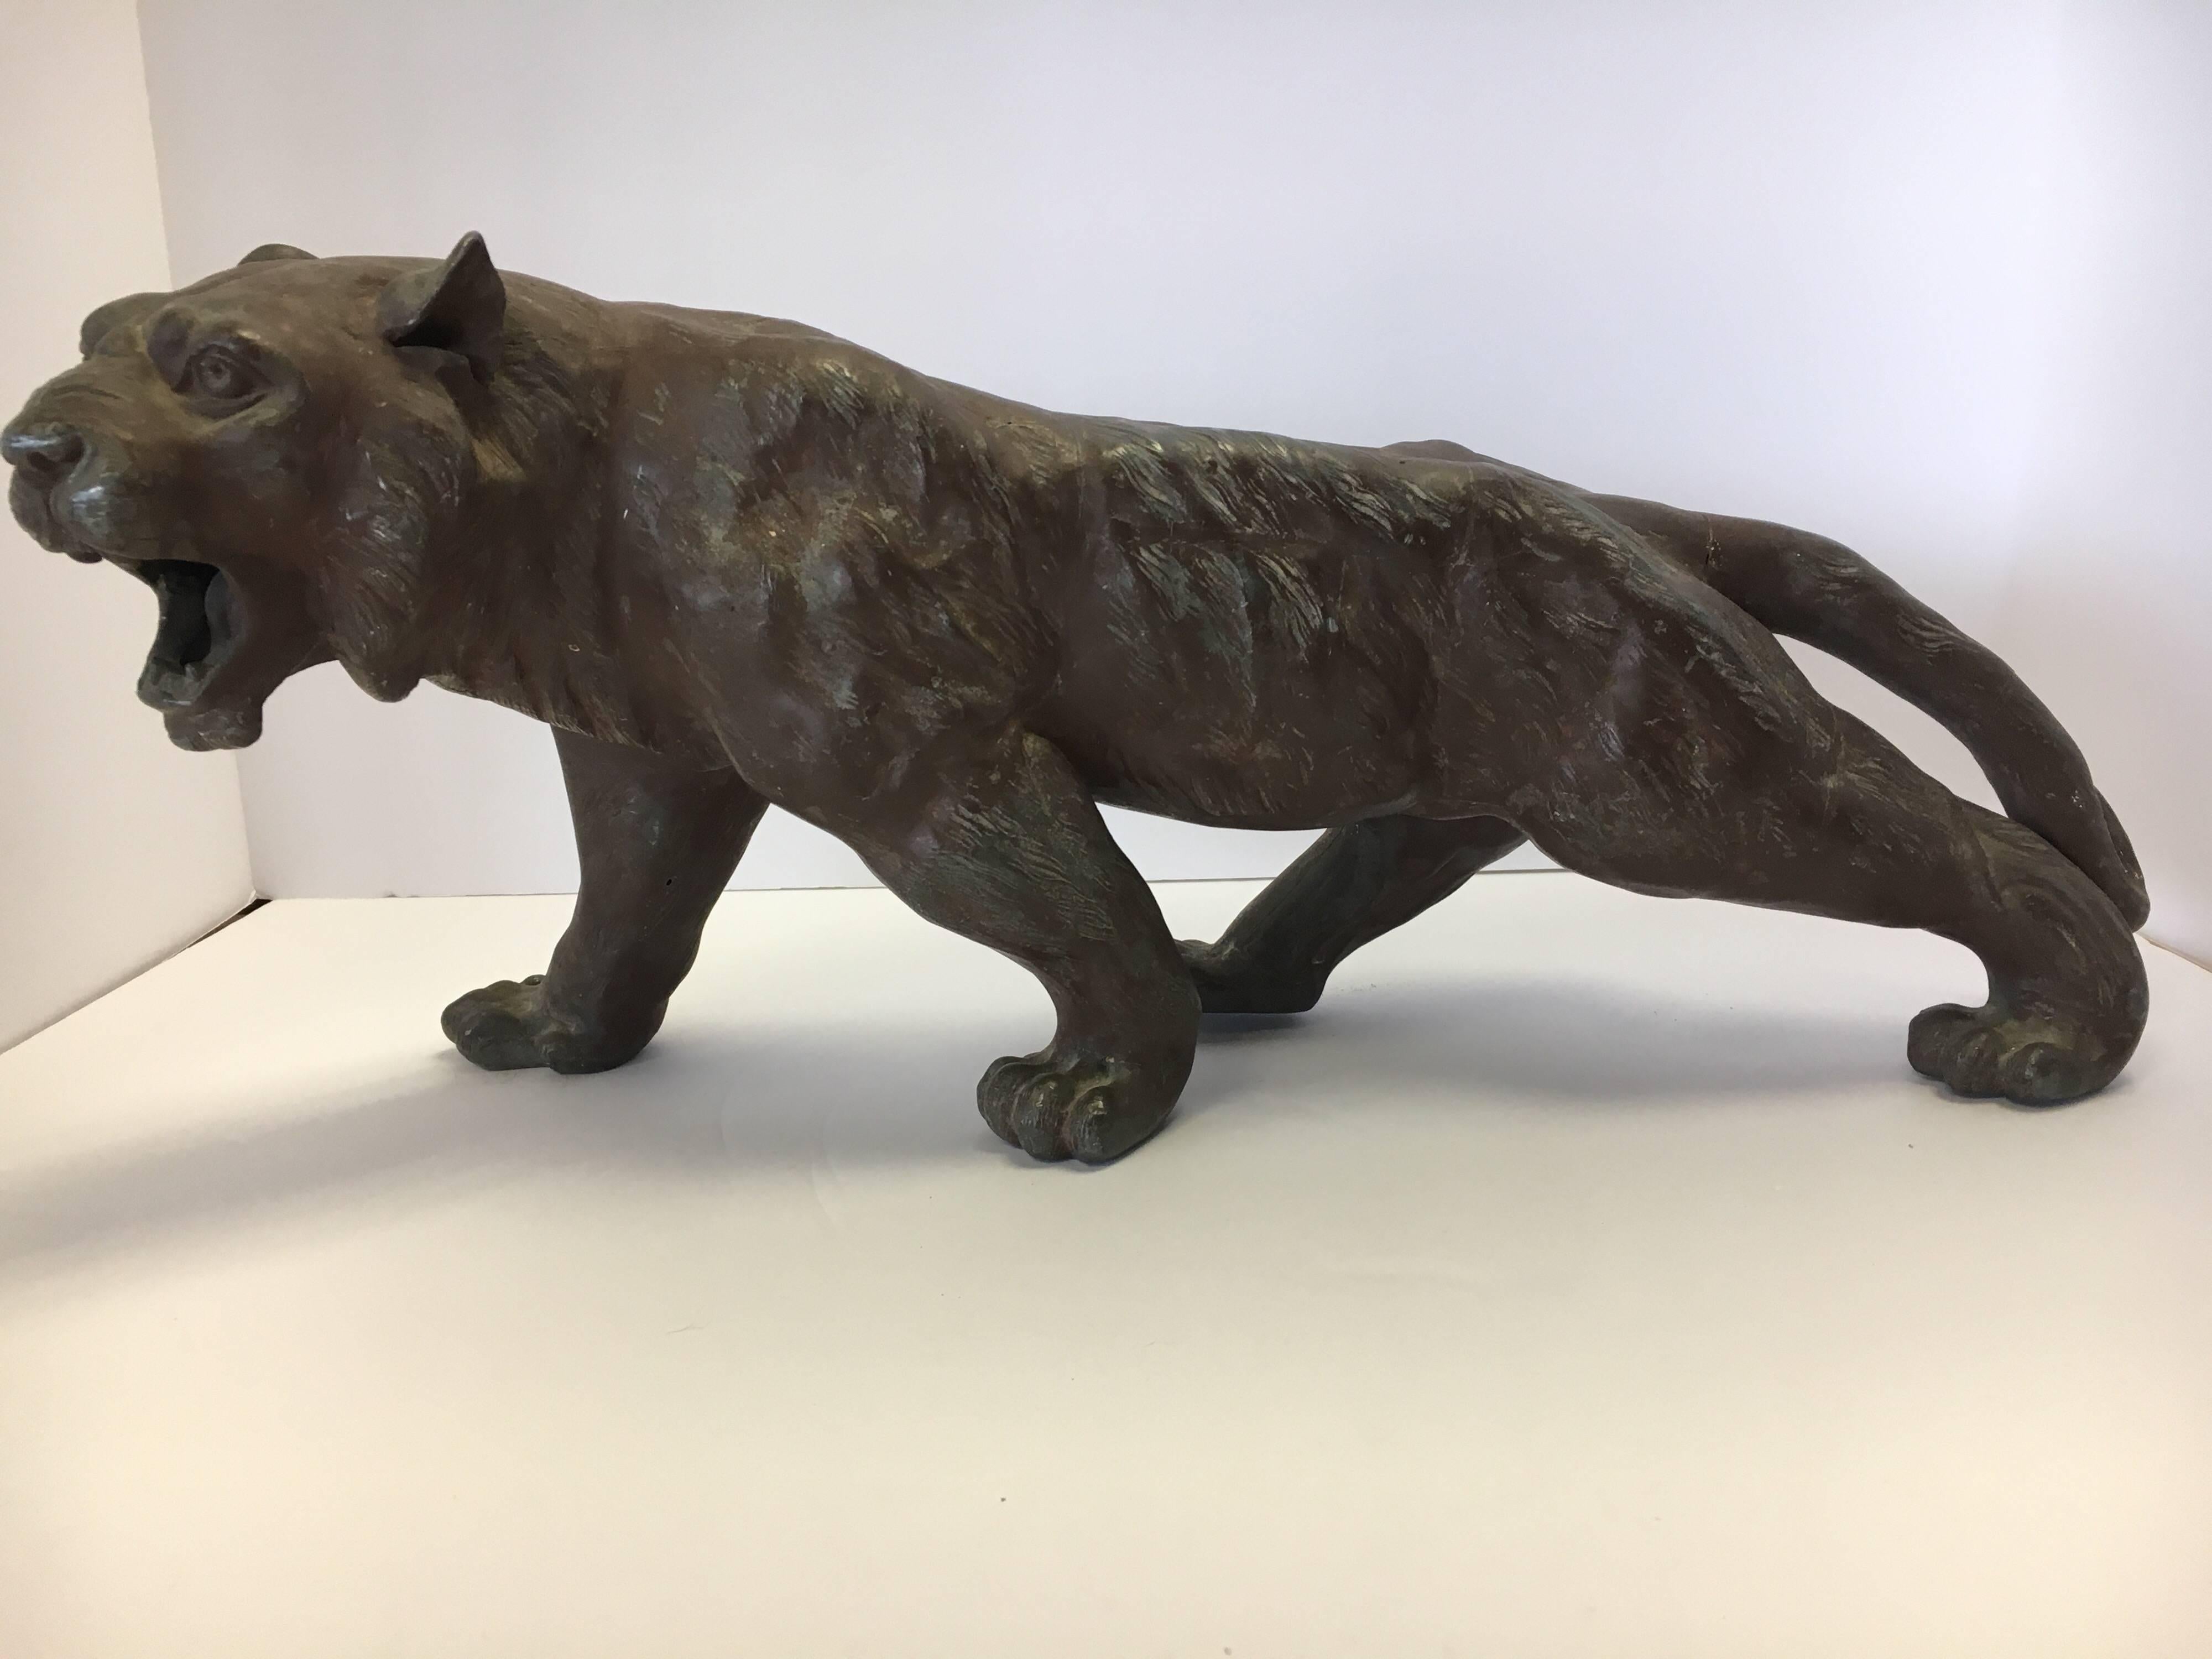 Unusual late 19th century panther/lion sculpture made of metal.